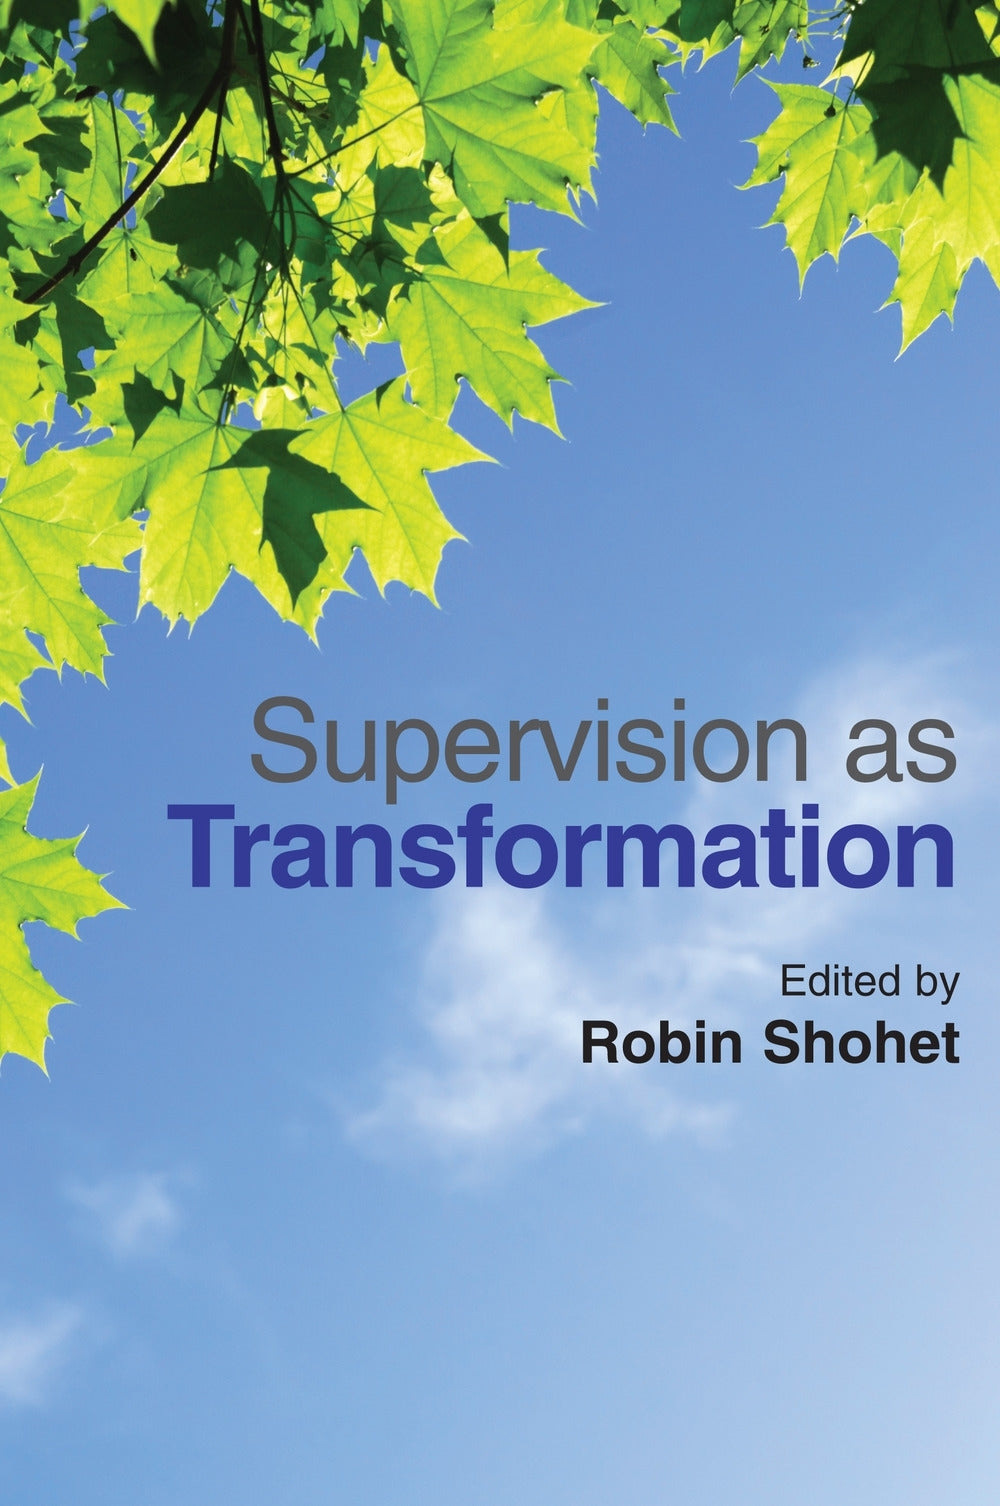 Supervision as Transformation by No Author Listed, Robin Shohet, Ben Fuchs